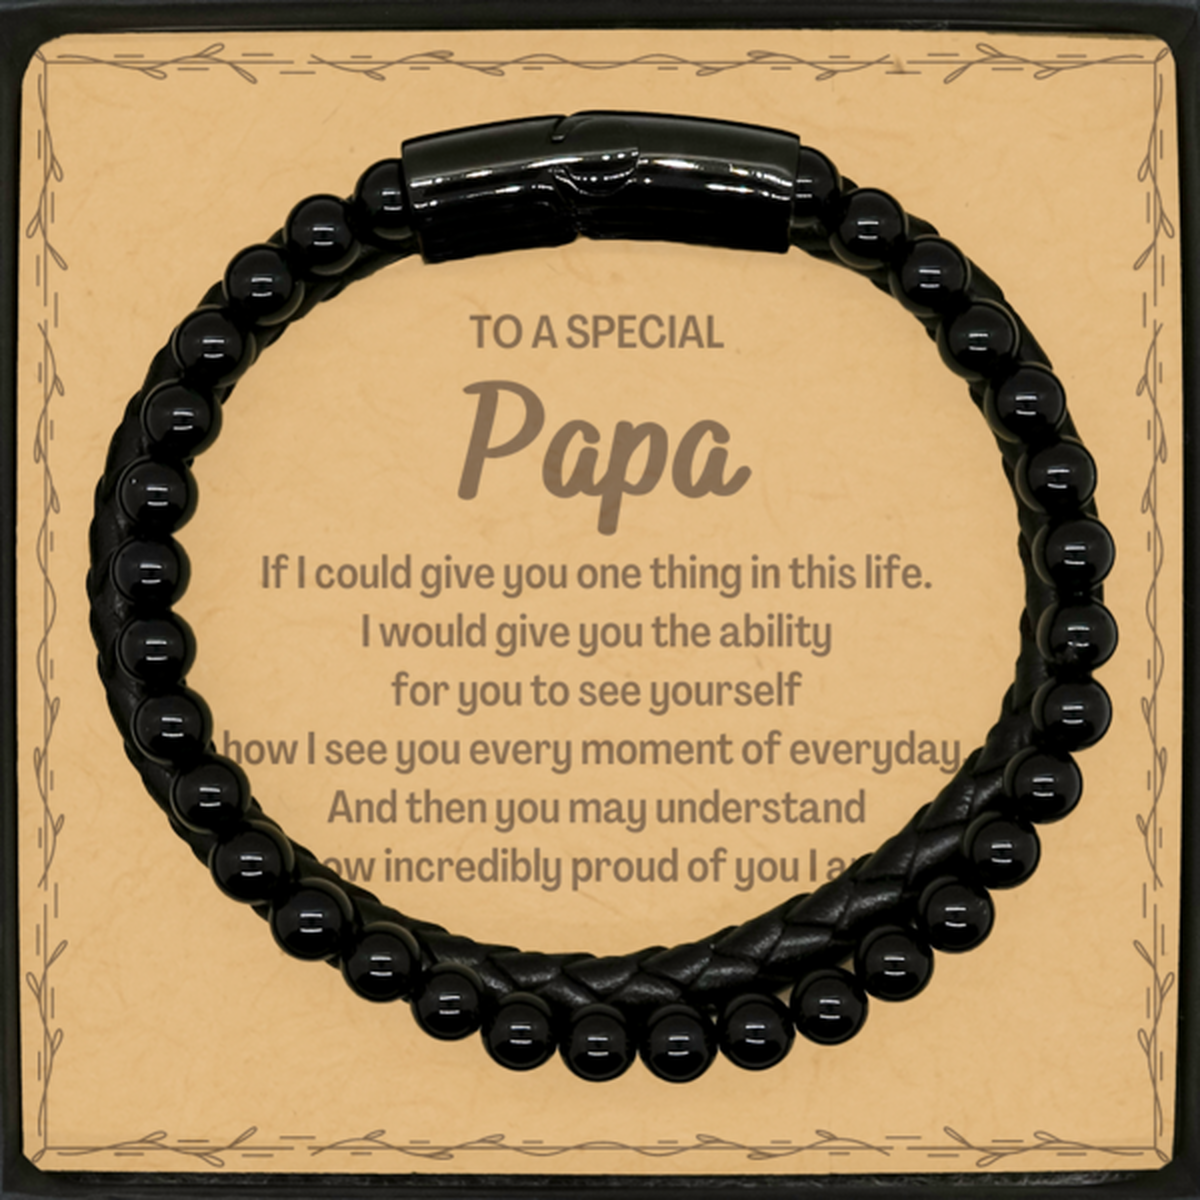 To My Papa Stone Leather Bracelets, Gifts For Papa Message Card, Inspirational Gifts for Christmas Birthday, Epic Gifts for Papa To A Special Papa how incredibly proud of you I am